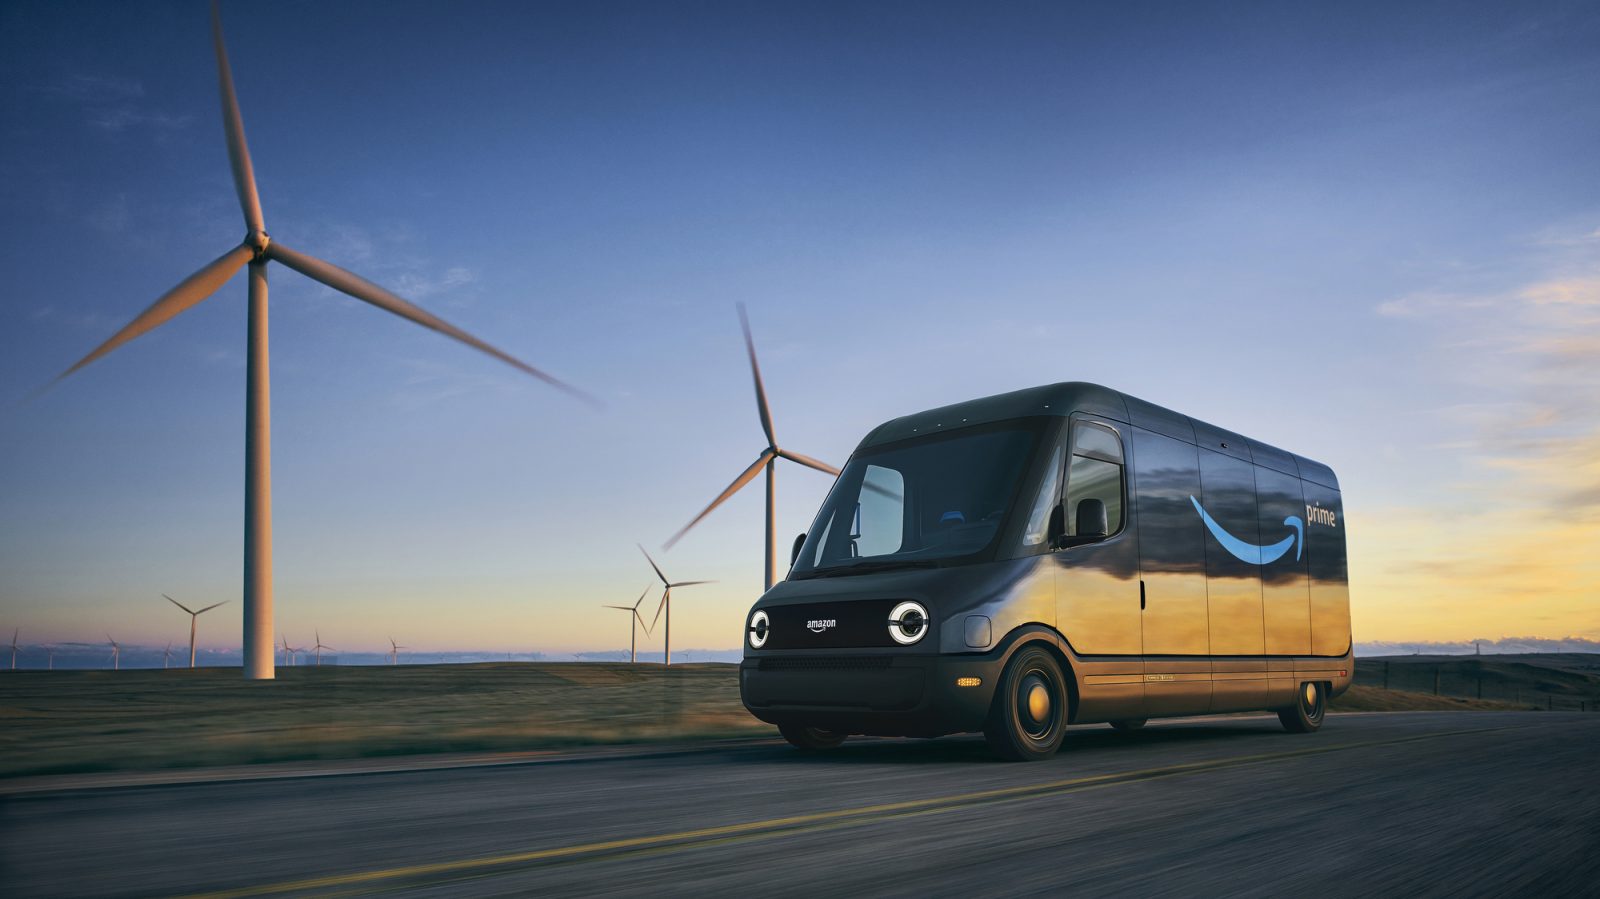 Amazon is committed to decarbonizing its delivery fleet and has rolled out more than 15,000 custom electric delivery vans across the U.S.